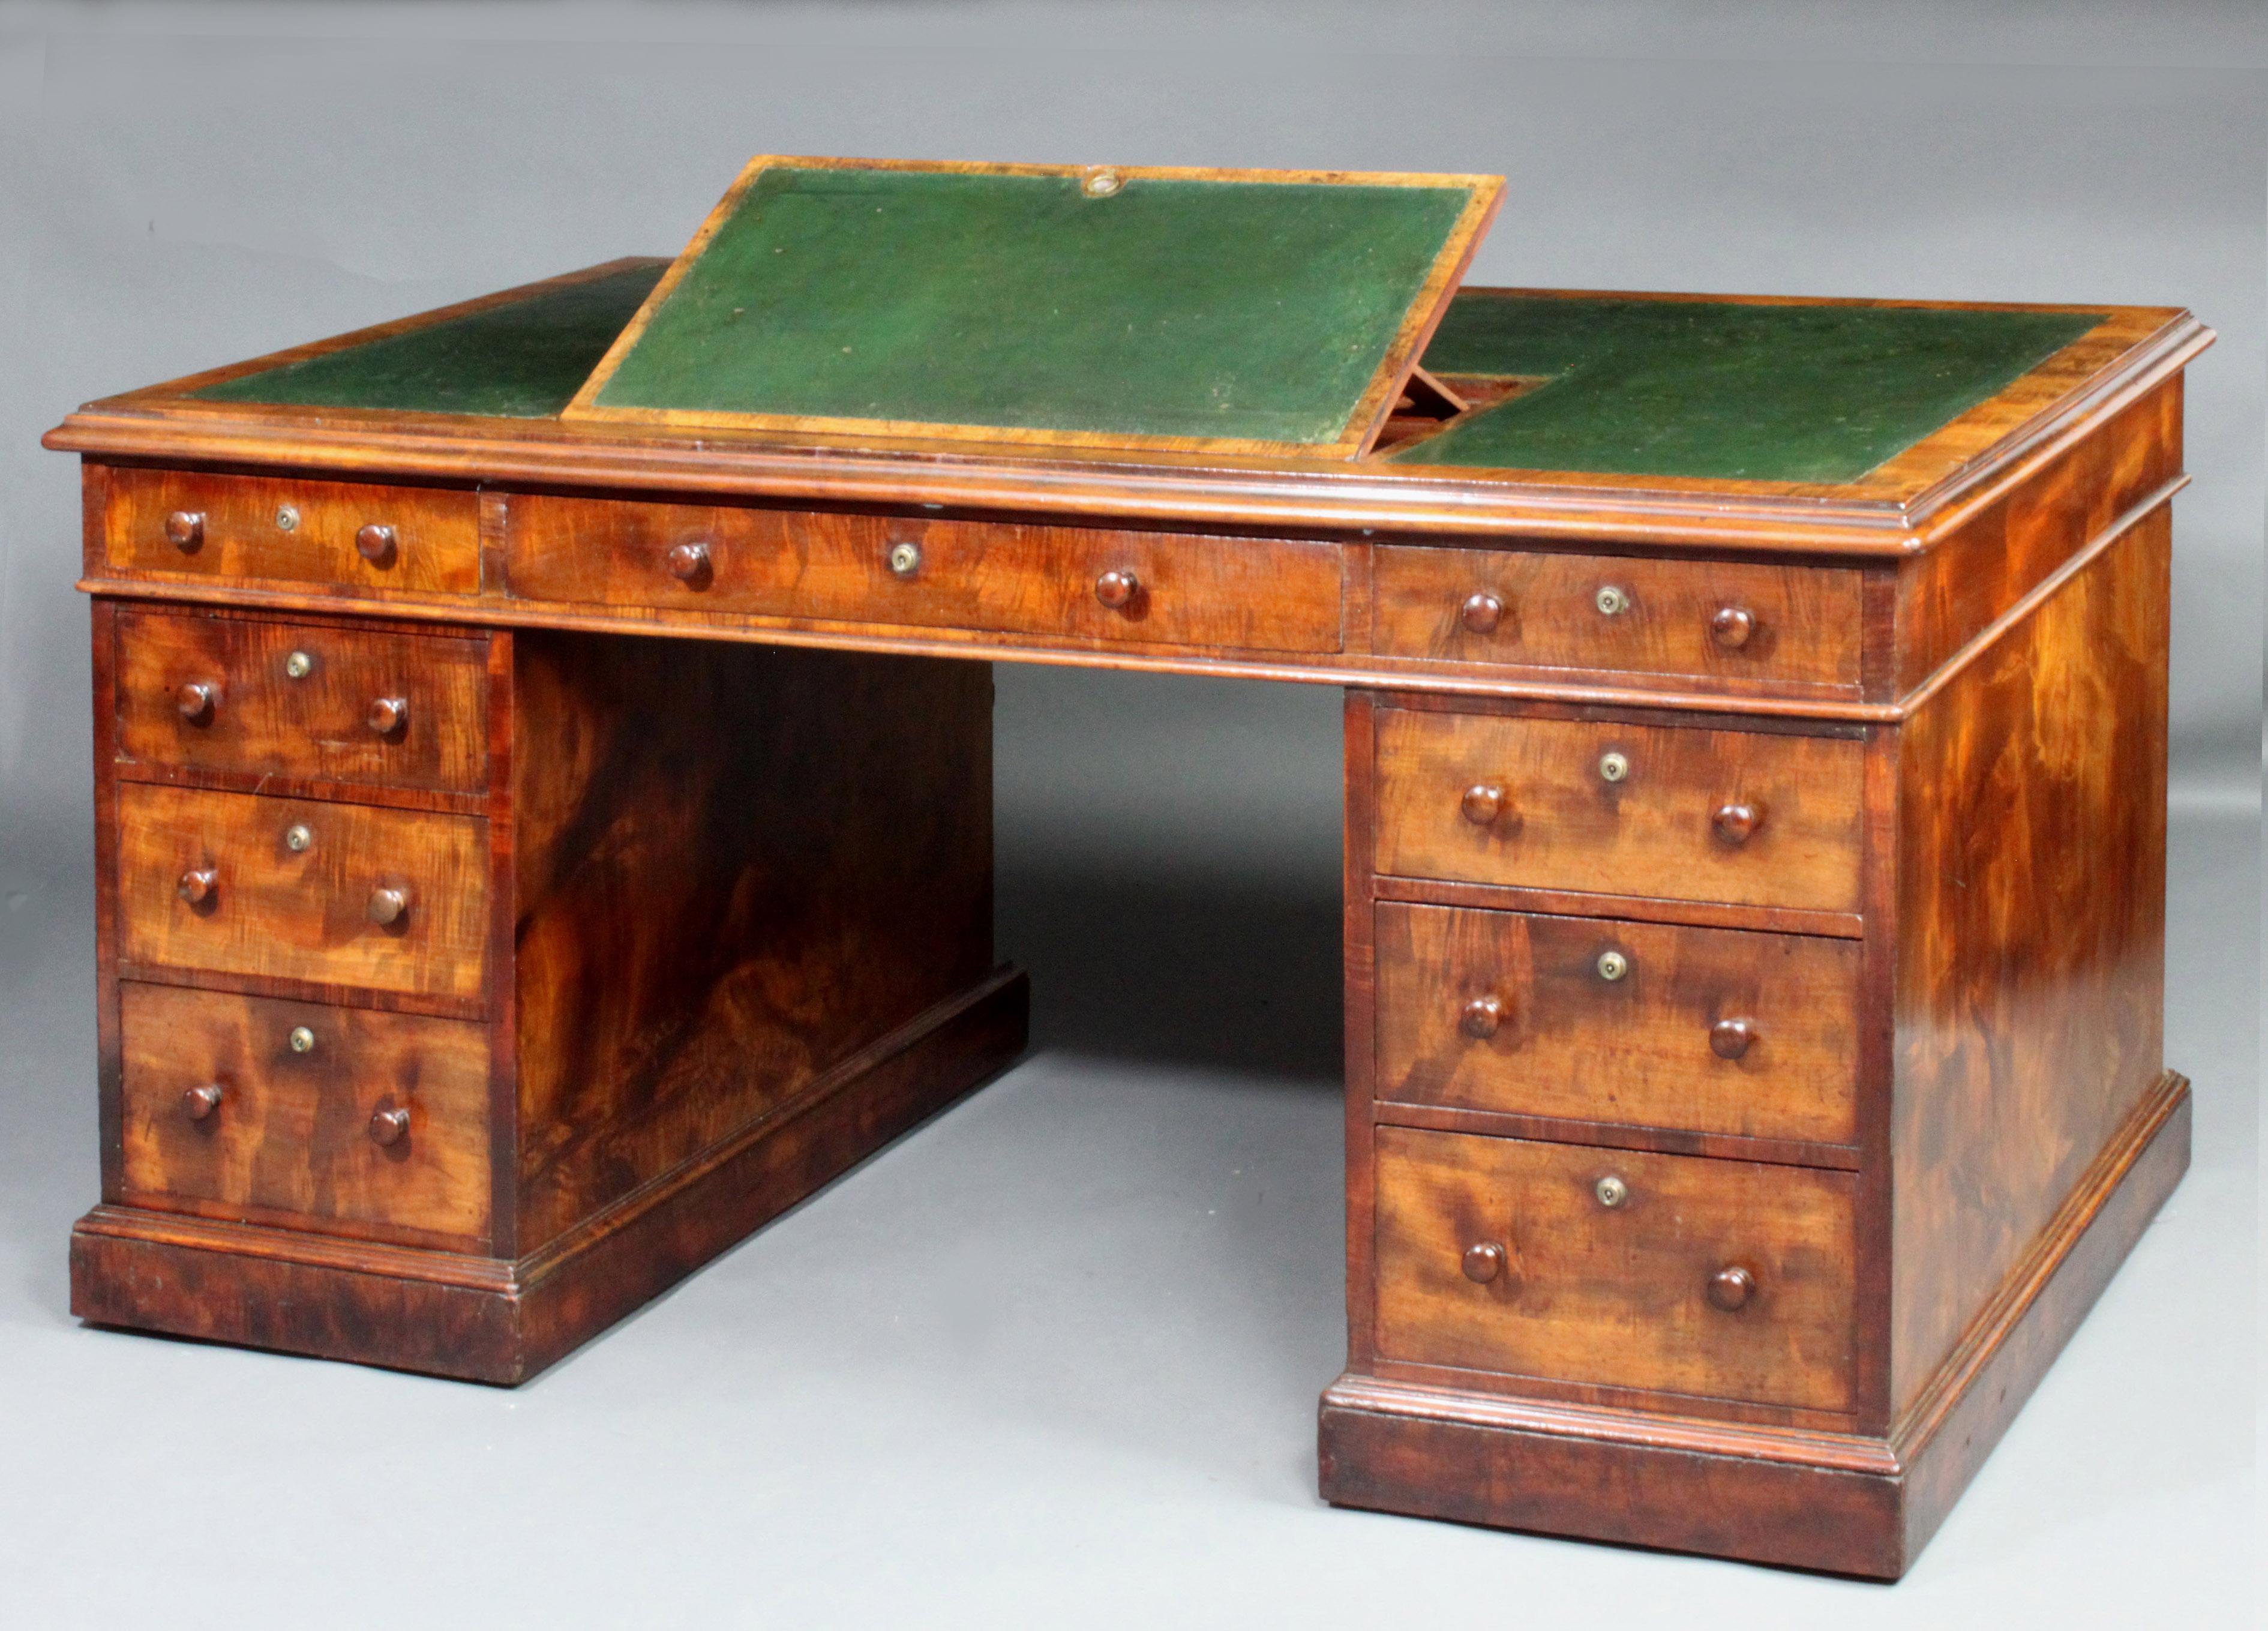 A fine quality partners desk in exceptional figured mahogany veneers, original dark green leather, bramah locks, ratchetted writing slope and mahogany lined drawers
Provenance: from Seend House, Wiltshire, England.